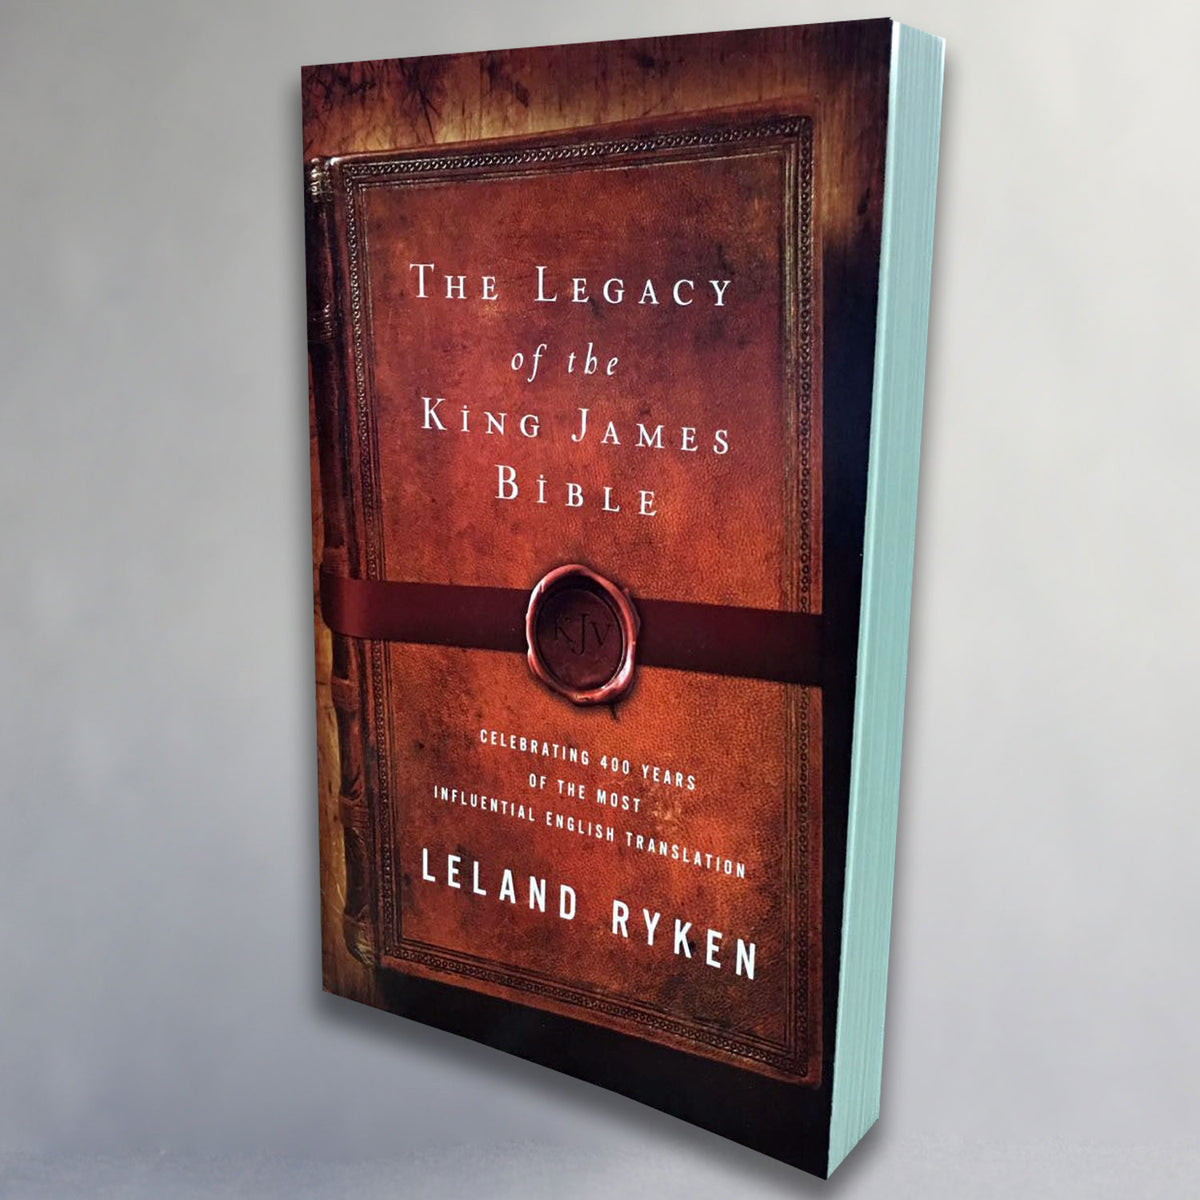 The Legacy of the King James Bible (Ryken)